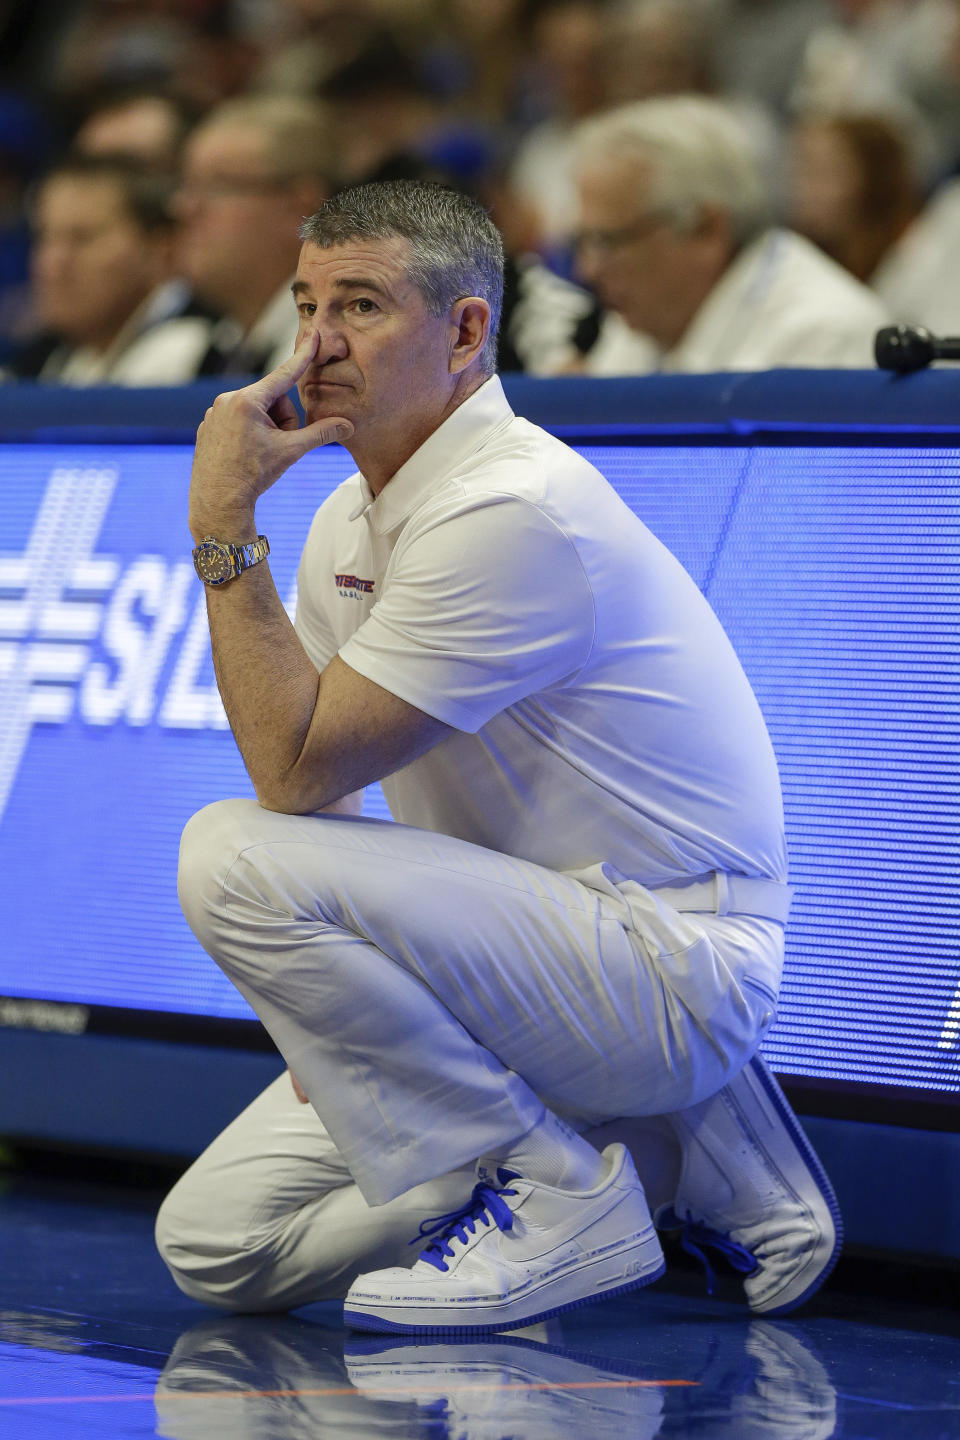 Boise State coach Leon Rice watches from the sideline during the second half of the team's NCAA college basketball game against San Diego State, Sunday, Feb. 16, 2020, in Boise, Idaho. San Diego State won 72-55. (AP Photo/Steve Conner)